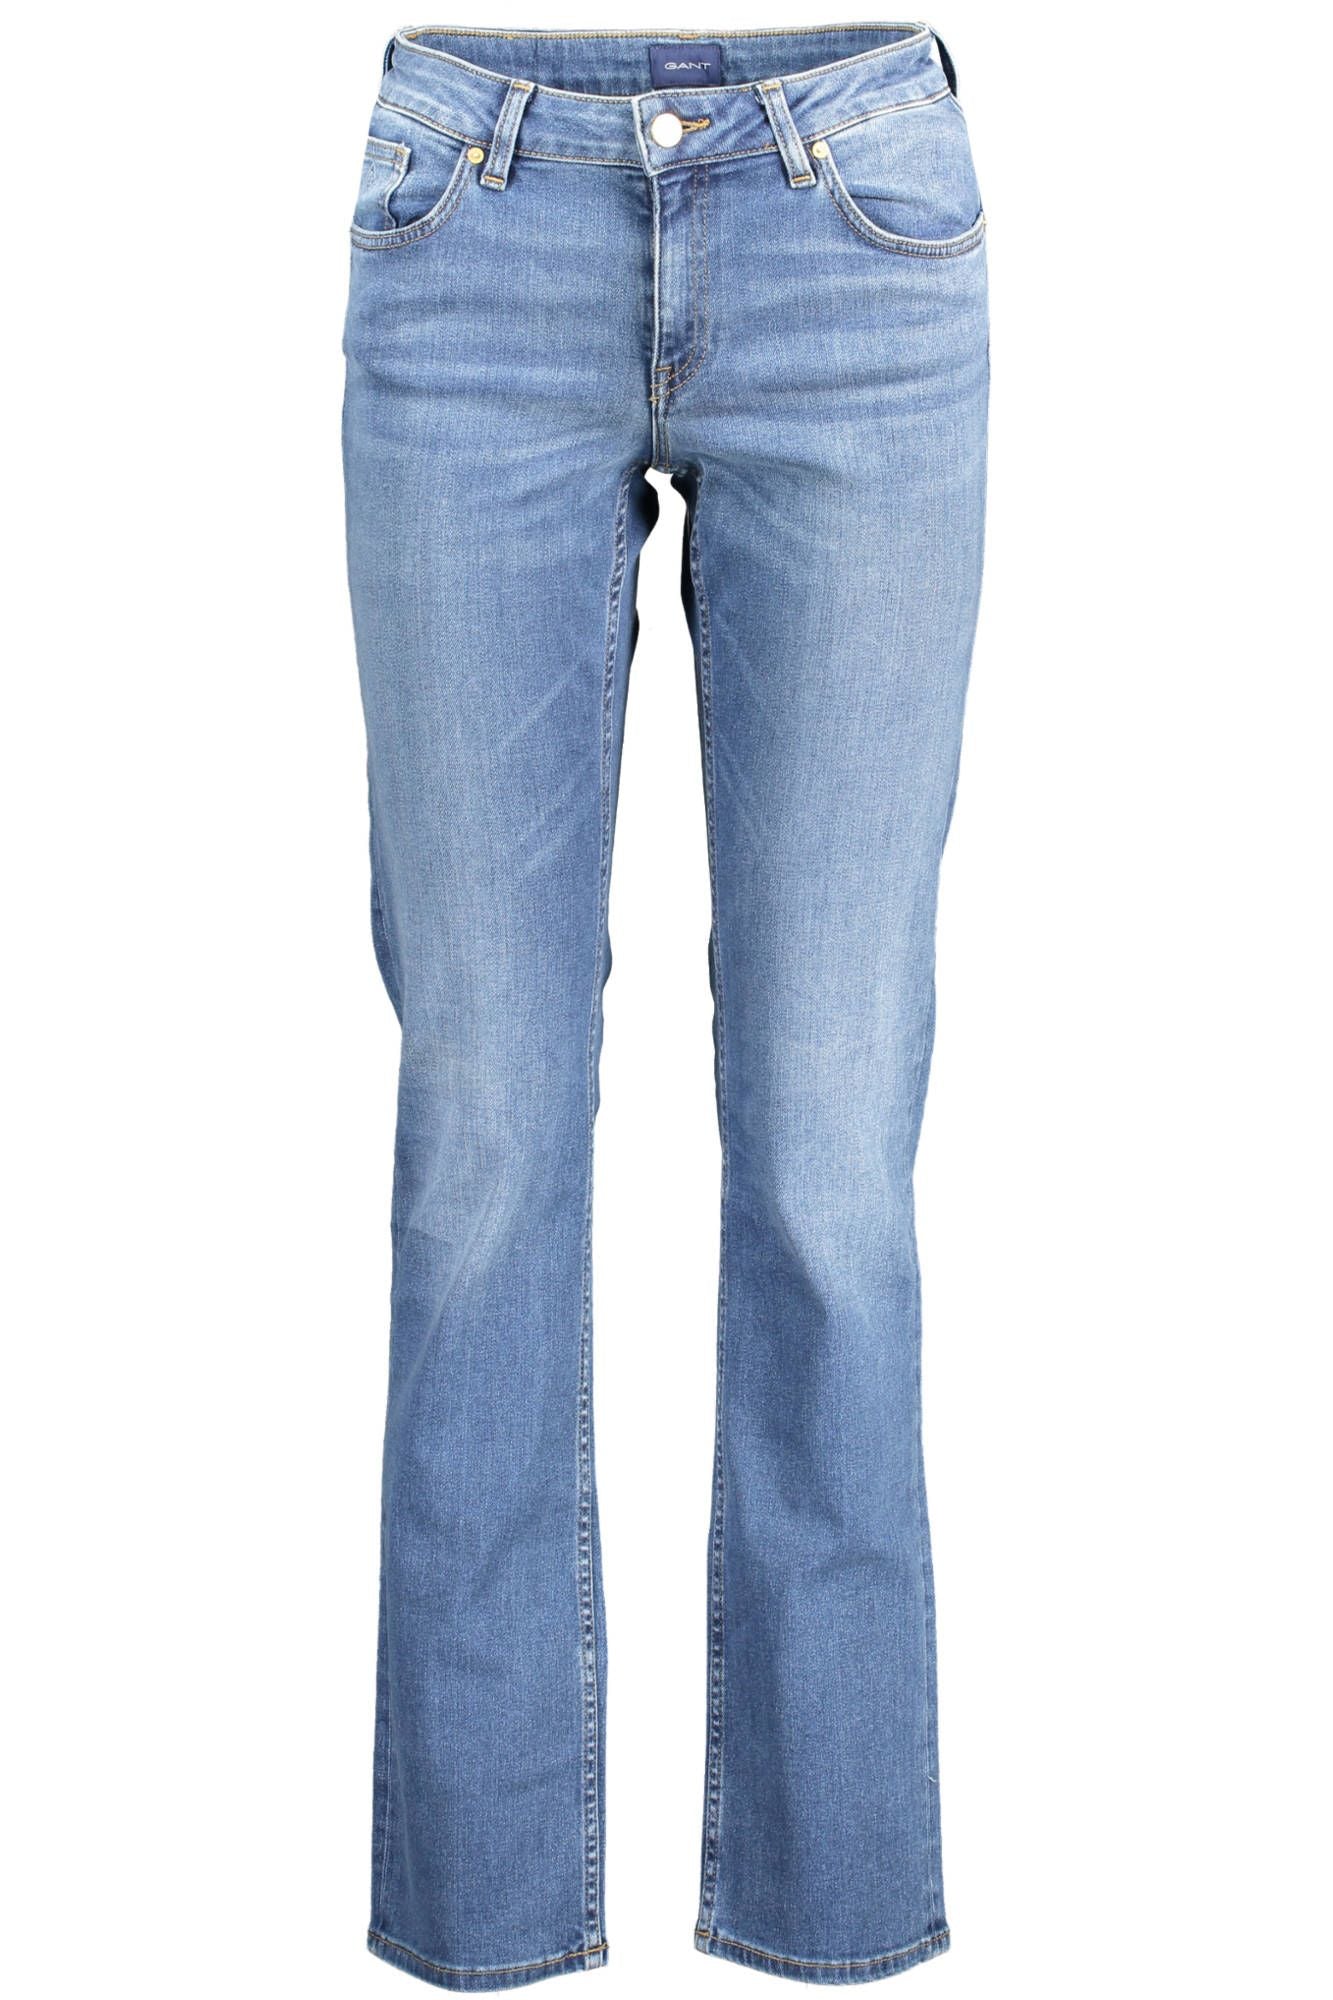 Chic Slim-Fit Faded Blue Jeans